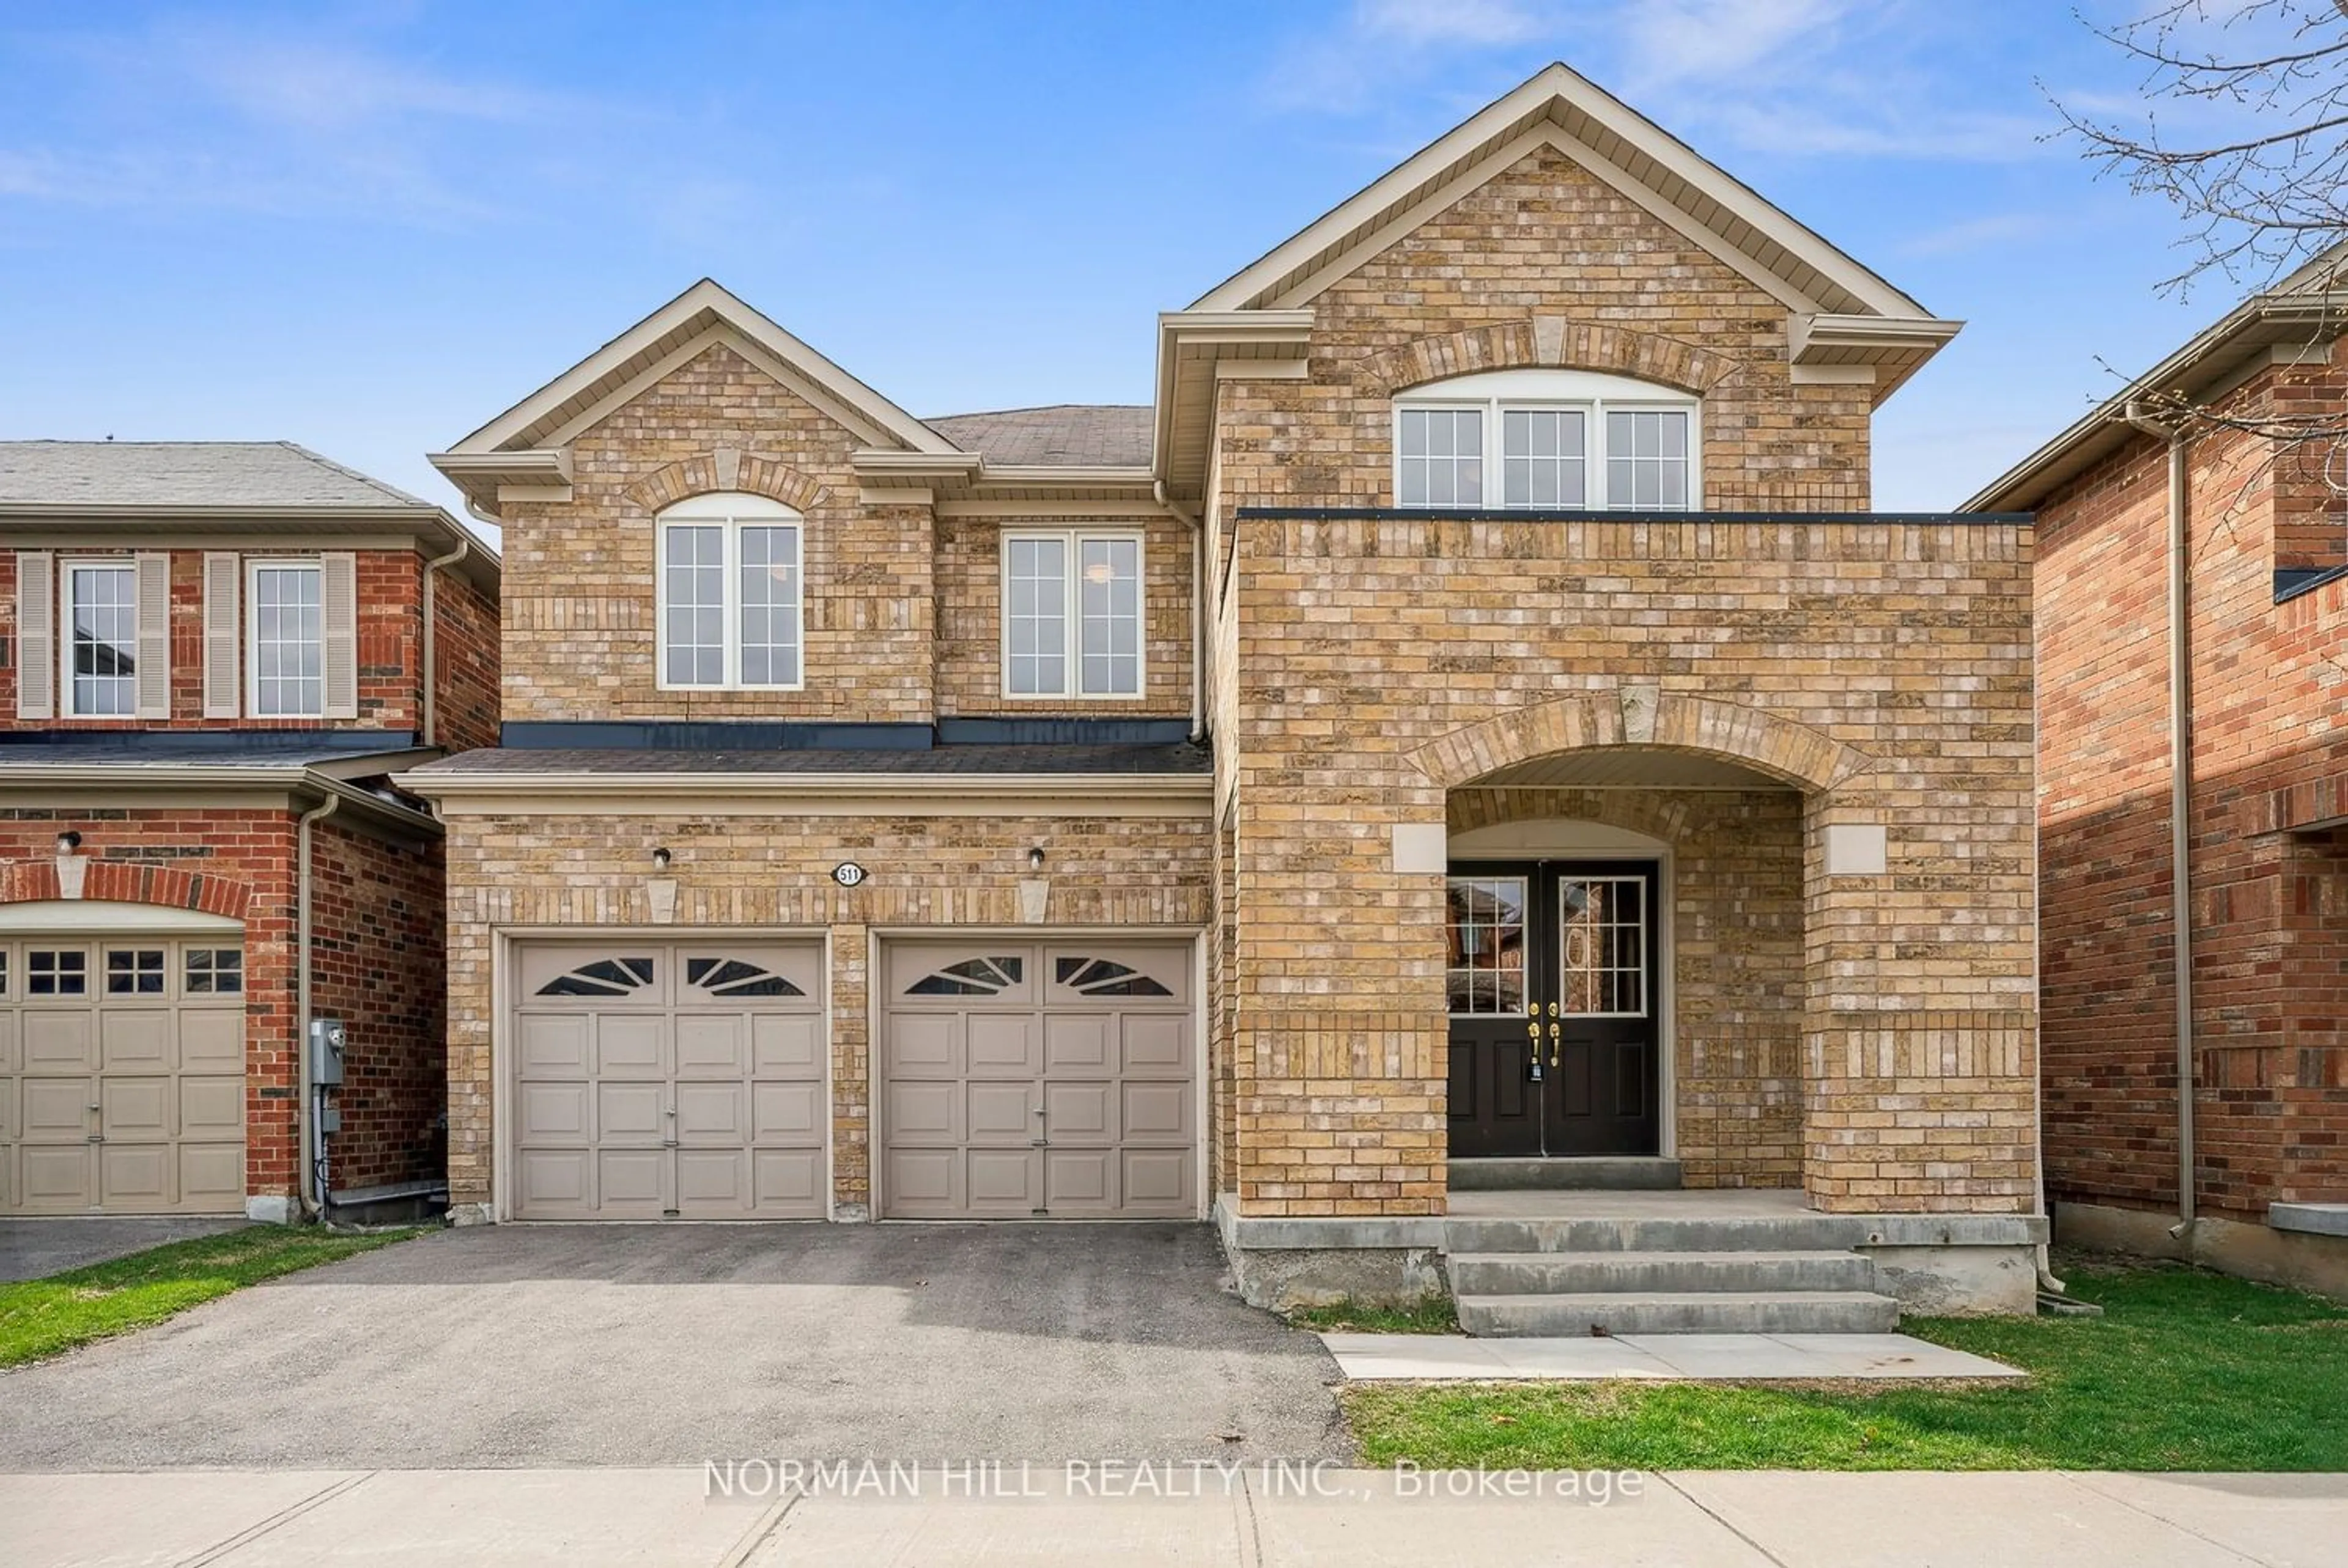 Home with brick exterior material for 511 Forsyth Farm Dr, Whitchurch-Stouffville Ontario L4A 0P3